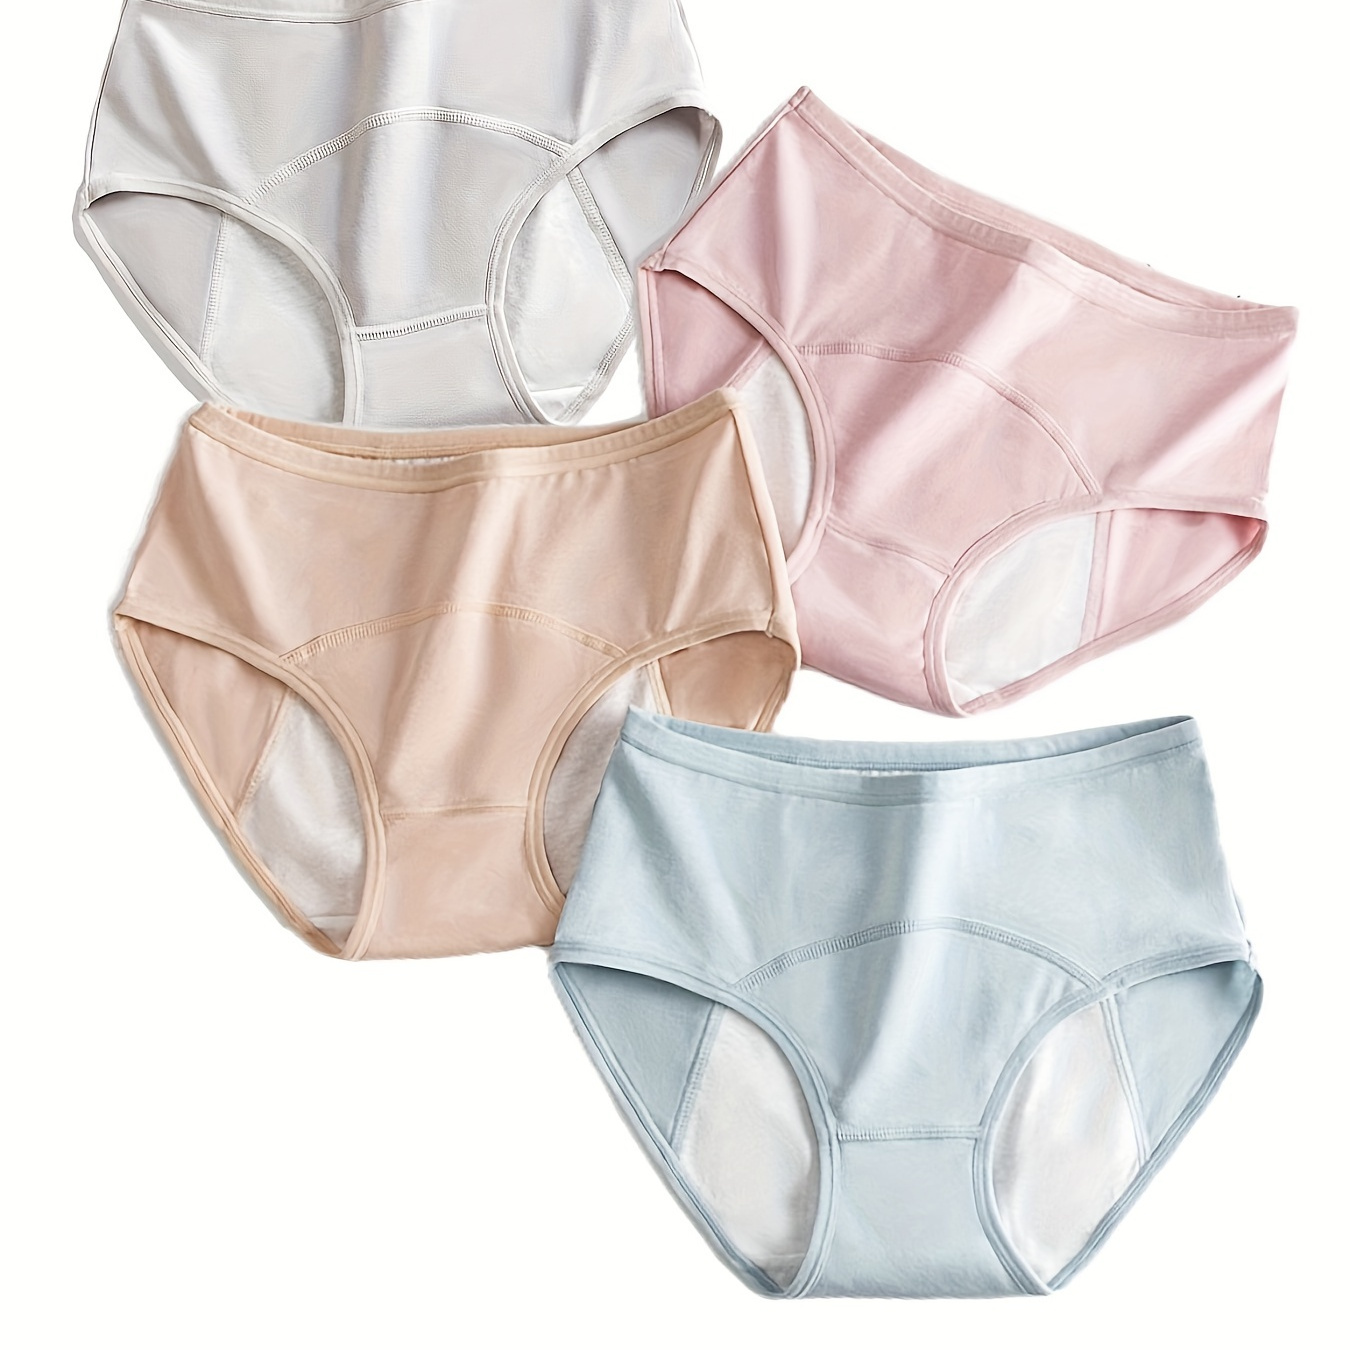 

4pcs Solid Physiological Leak-proof Briefs, Comfy Breathable Stretchy Intimates Panties, Women's Lingerie & Underwear